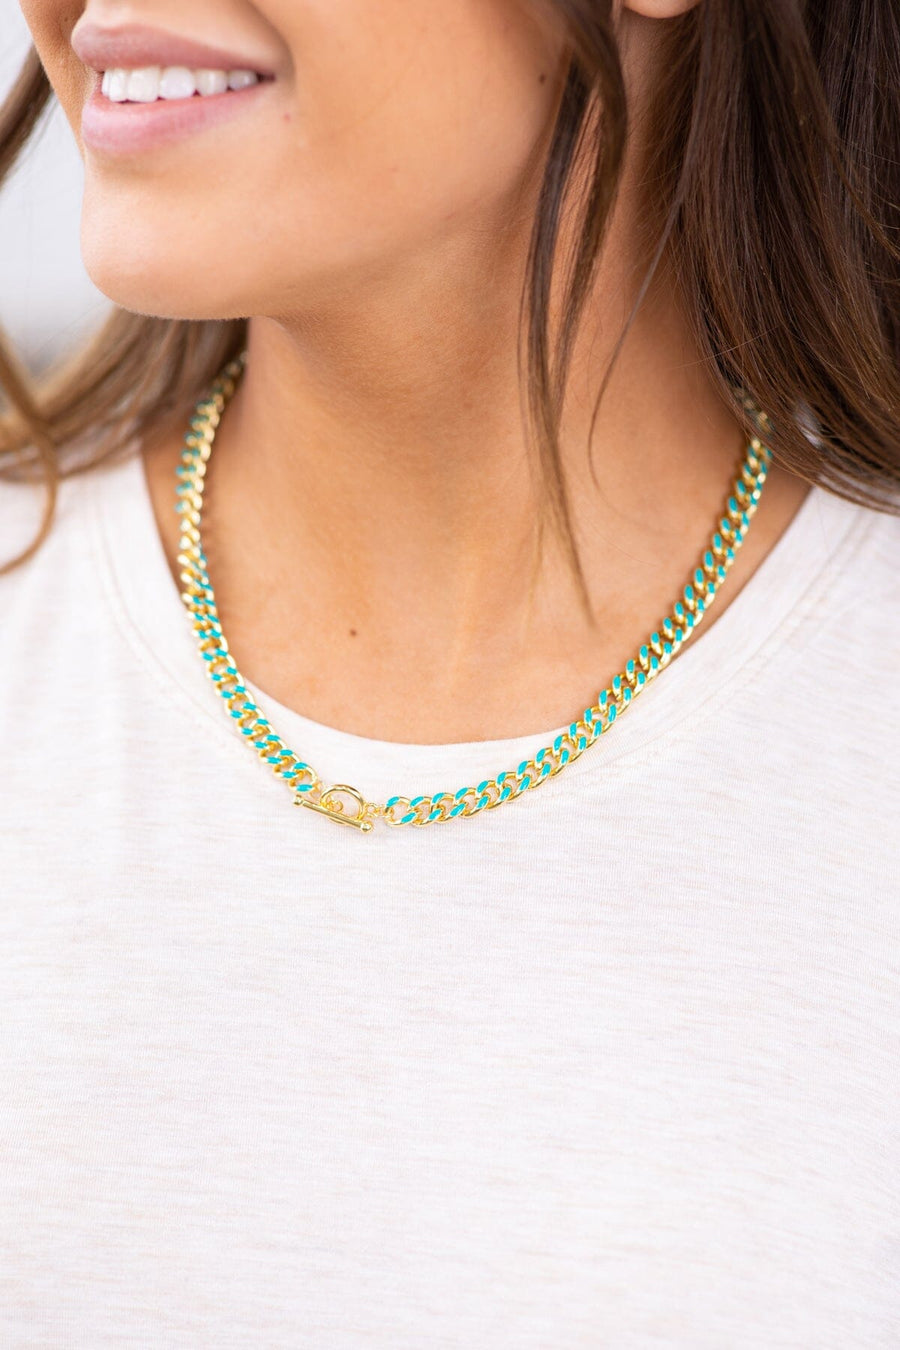 Turquoise and Gold Enamel Thick Chain Necklace - Filly Flair